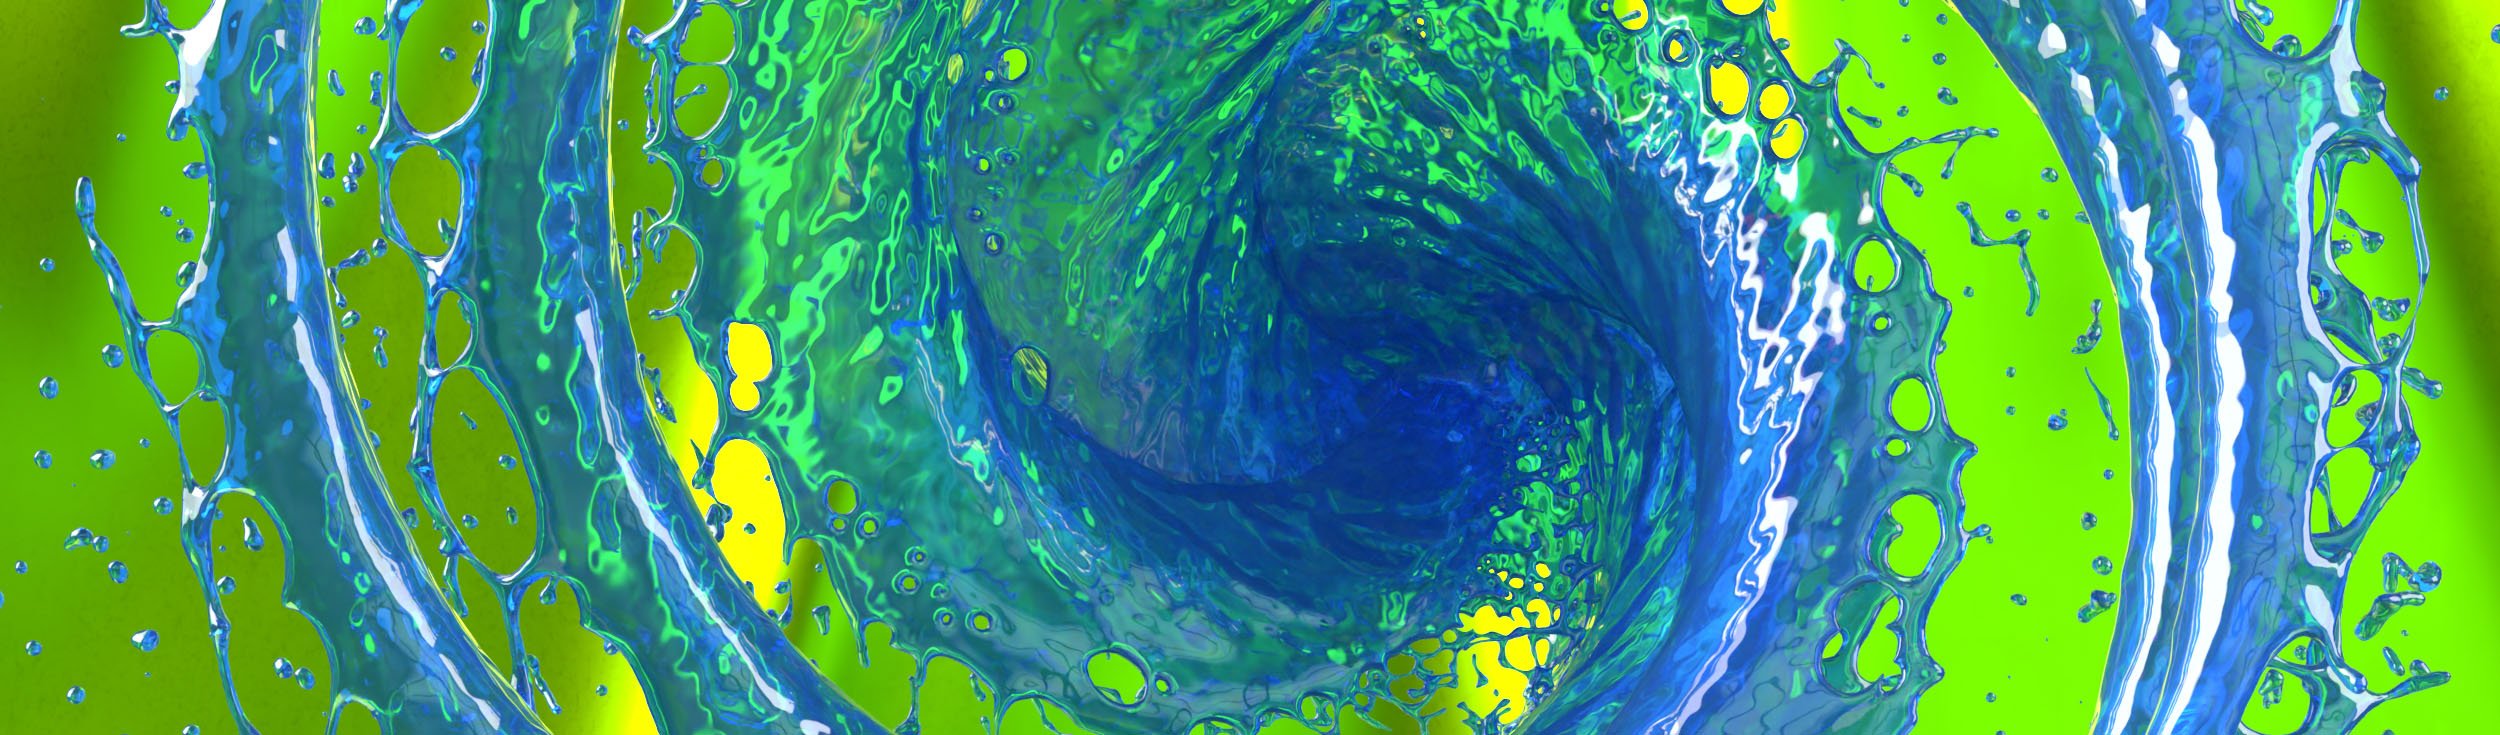 Swirling vortex of greens and blues